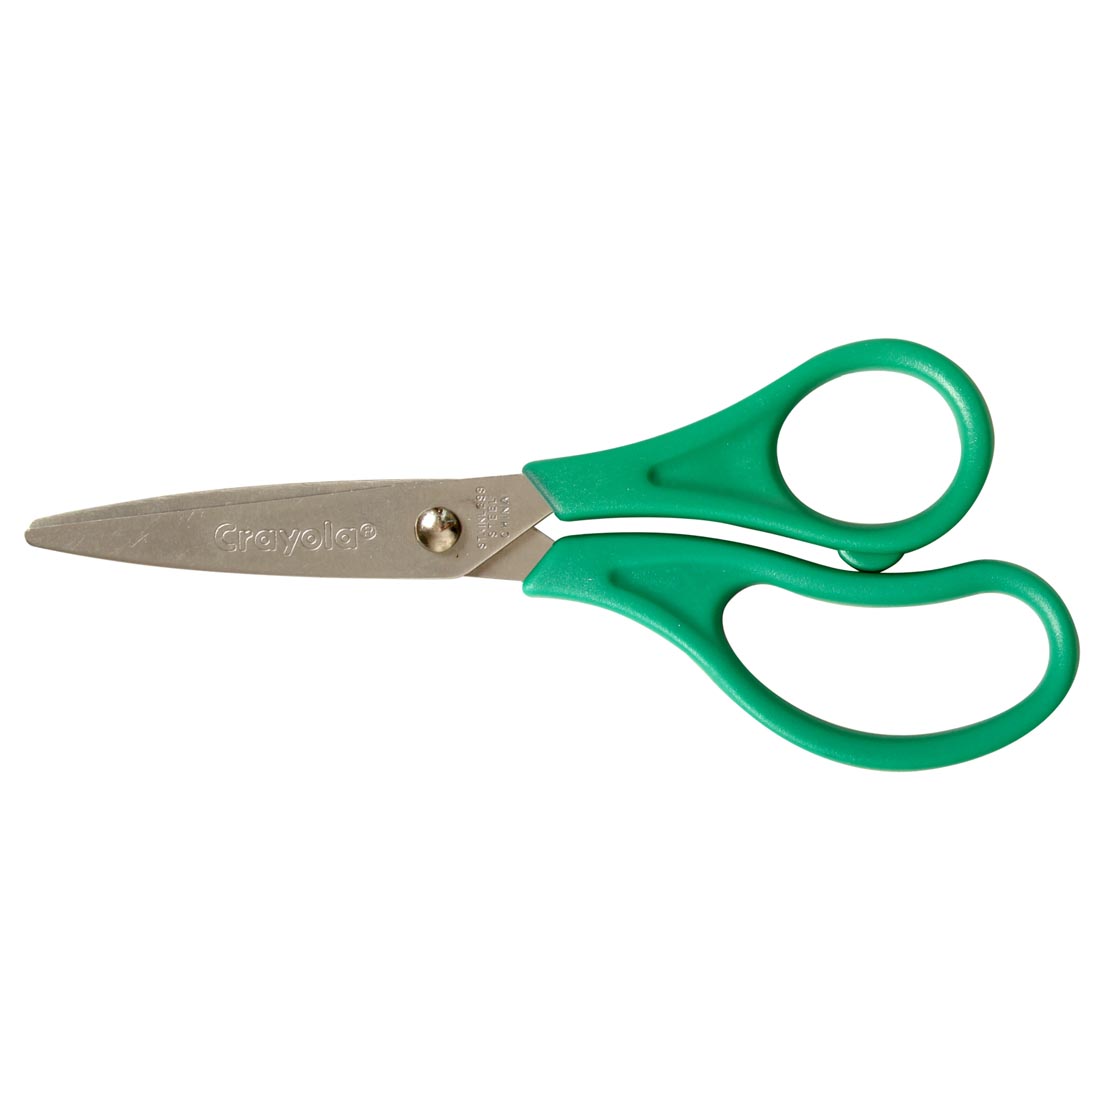 Crayola Pointed Scissors with green handles